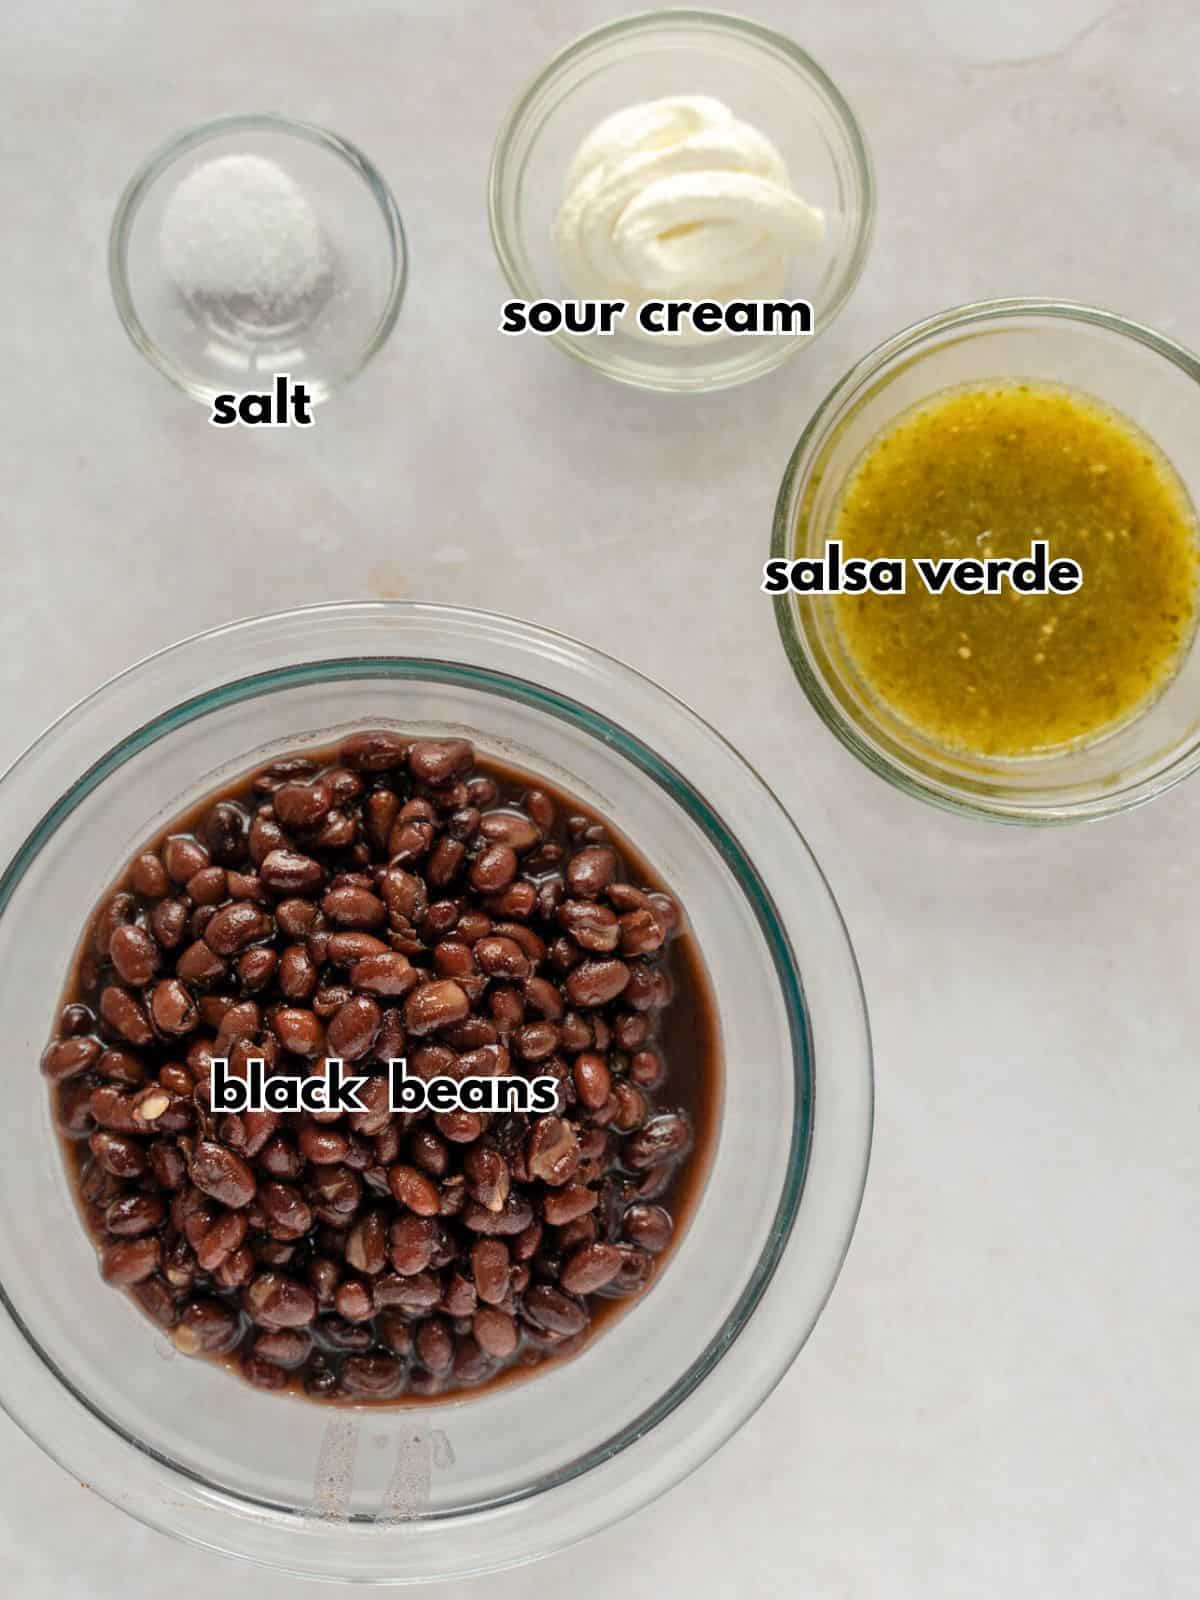 Ingredients labeled wit text- black beans, salsa verde, sour cream, and salt.